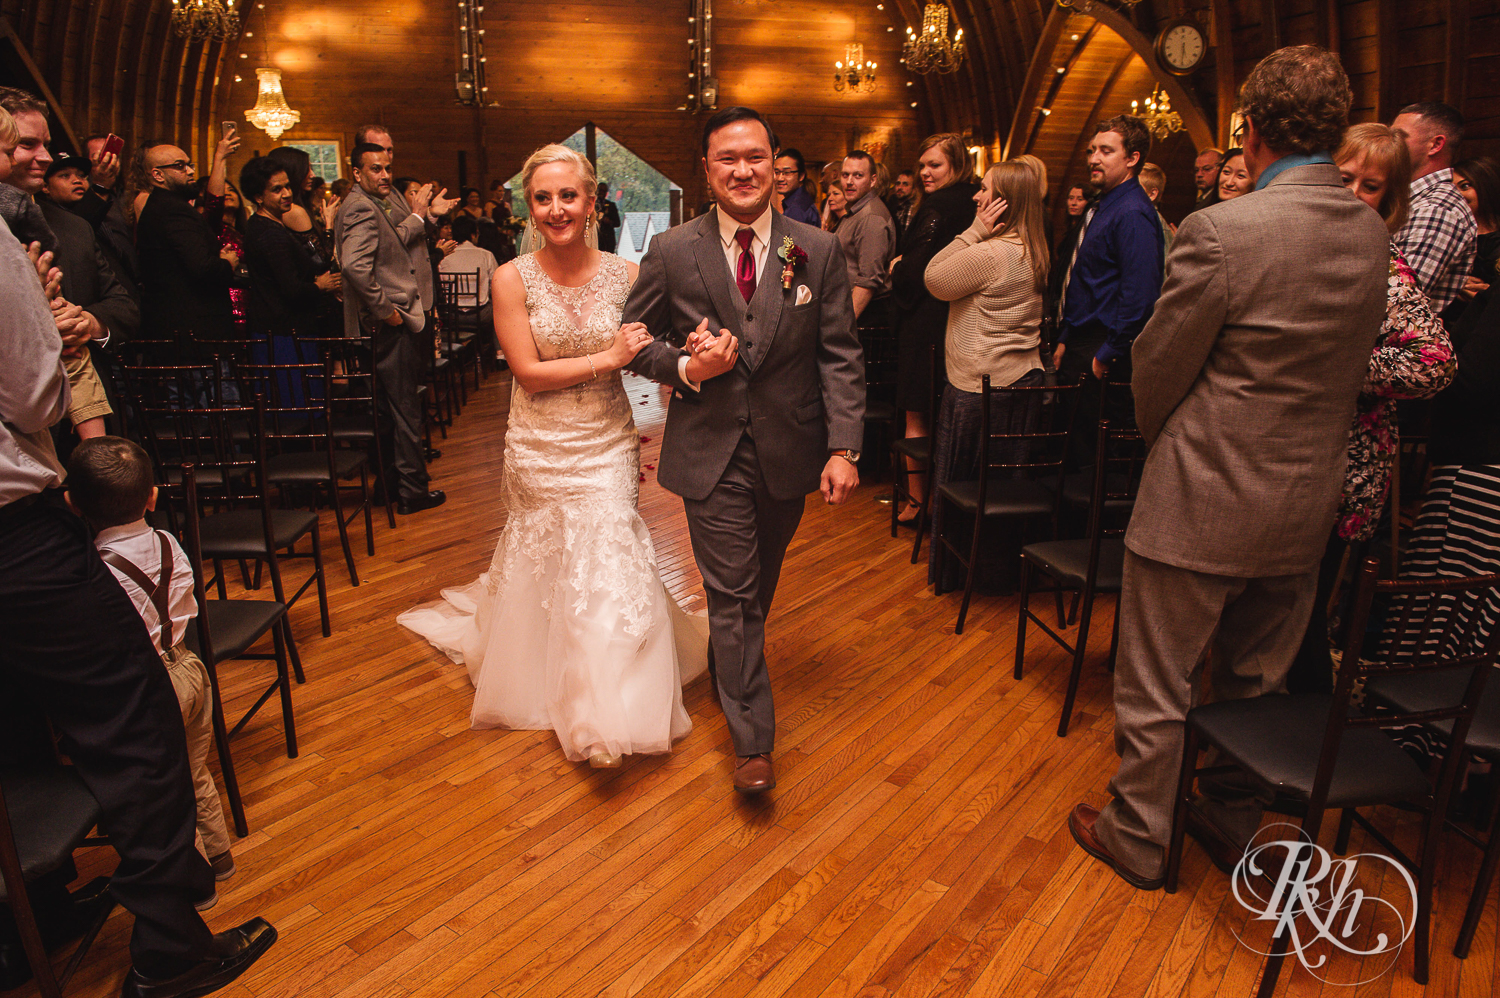 Bride and groom walk down aisle at Green Acres Event Center barn wedding ceremony in Eden Prairie, Minnesota.